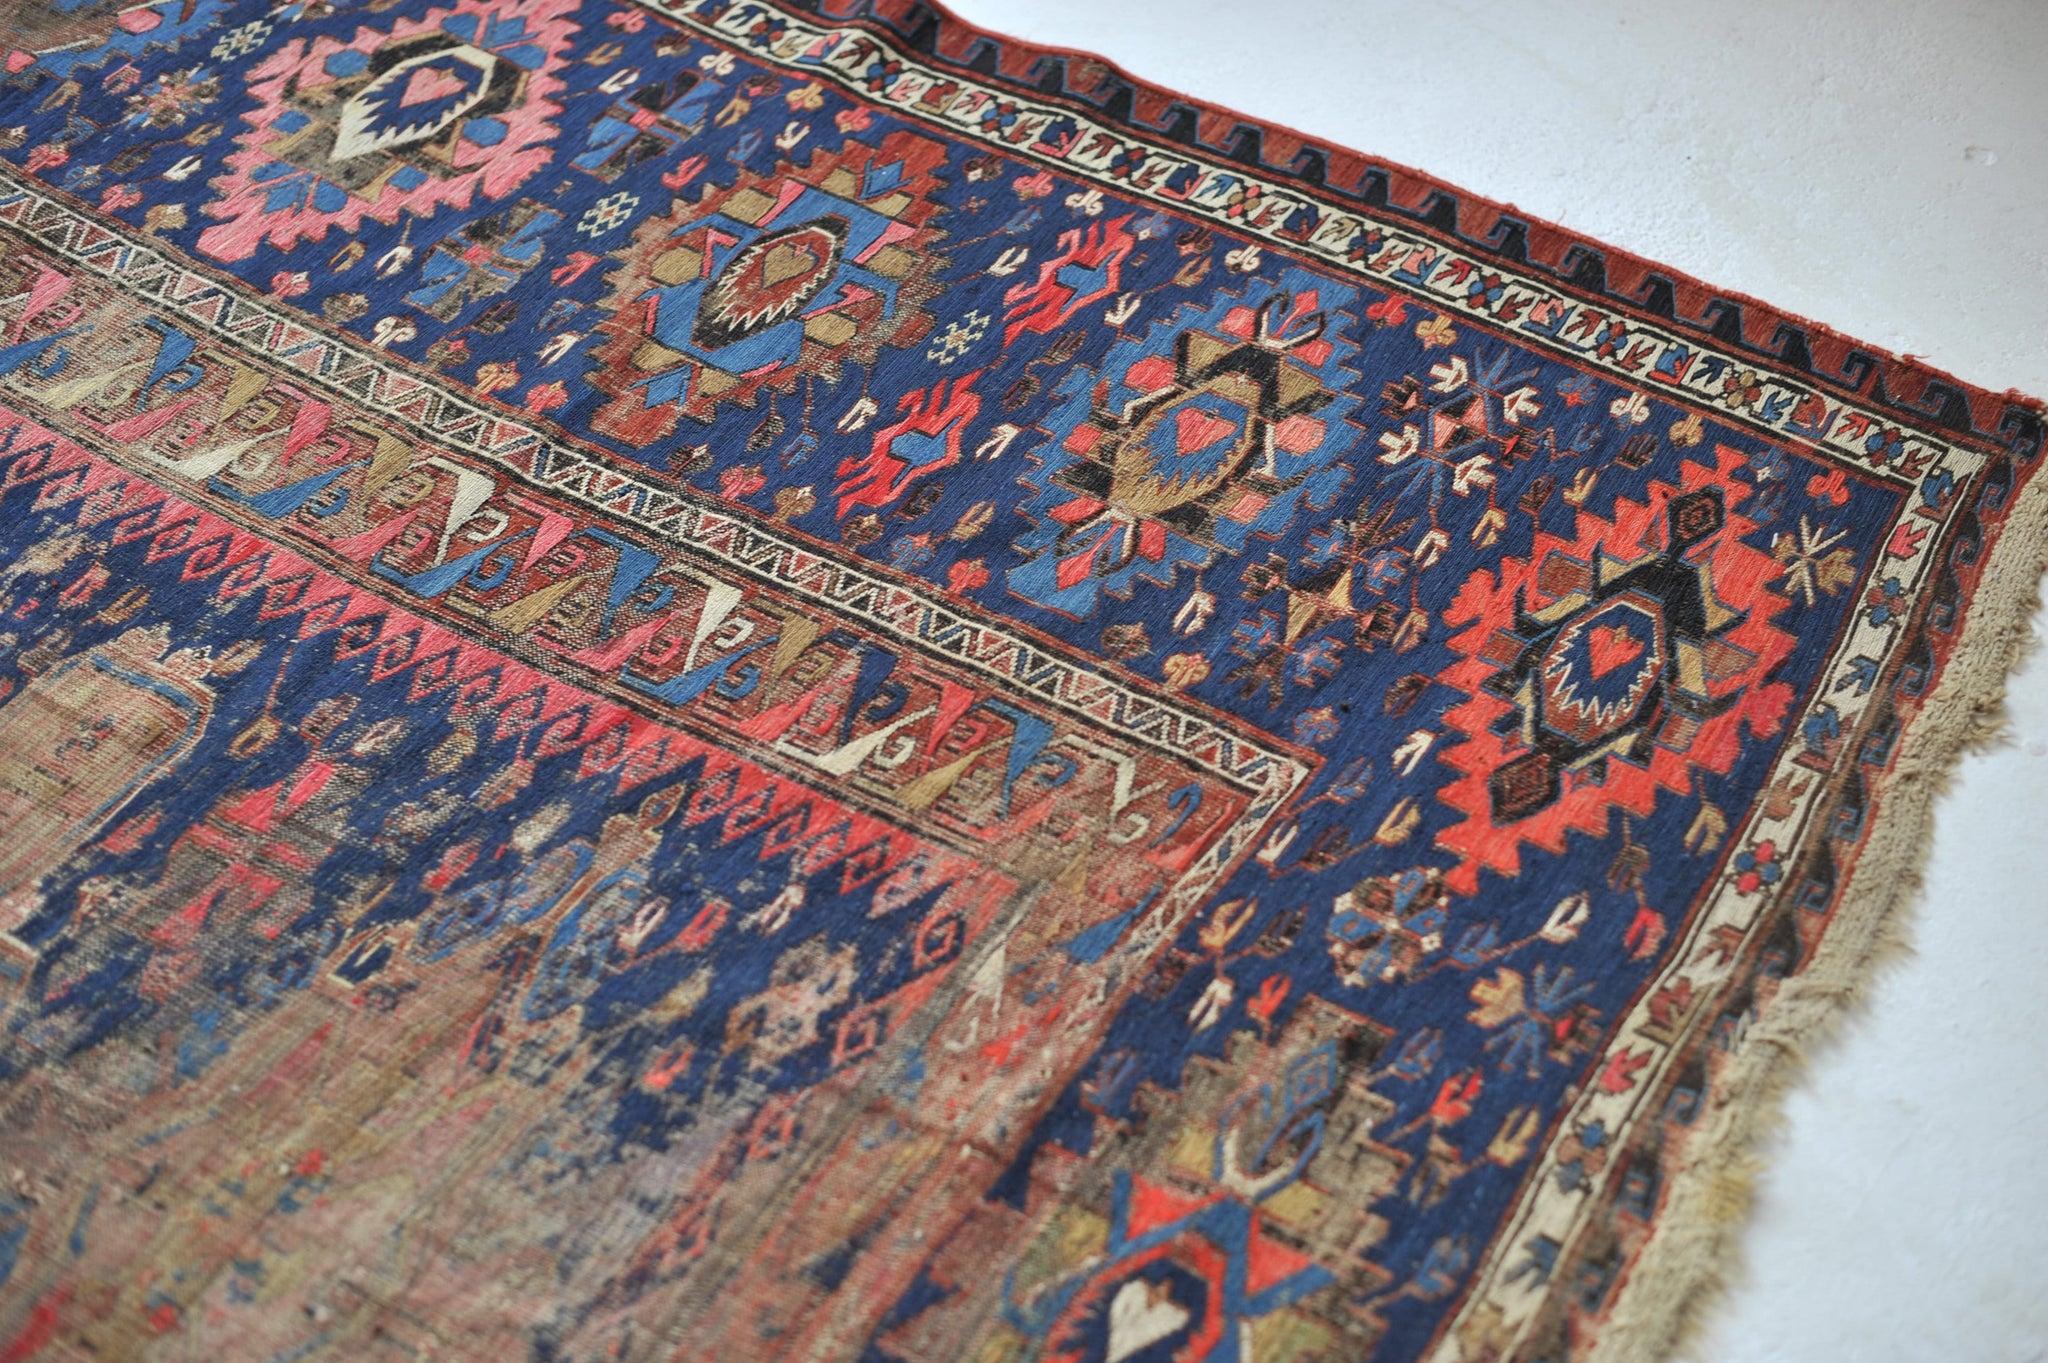 One-of-one Over-sized Palatial Antique Sumac Textile Rug, c.1910 For Sale 1